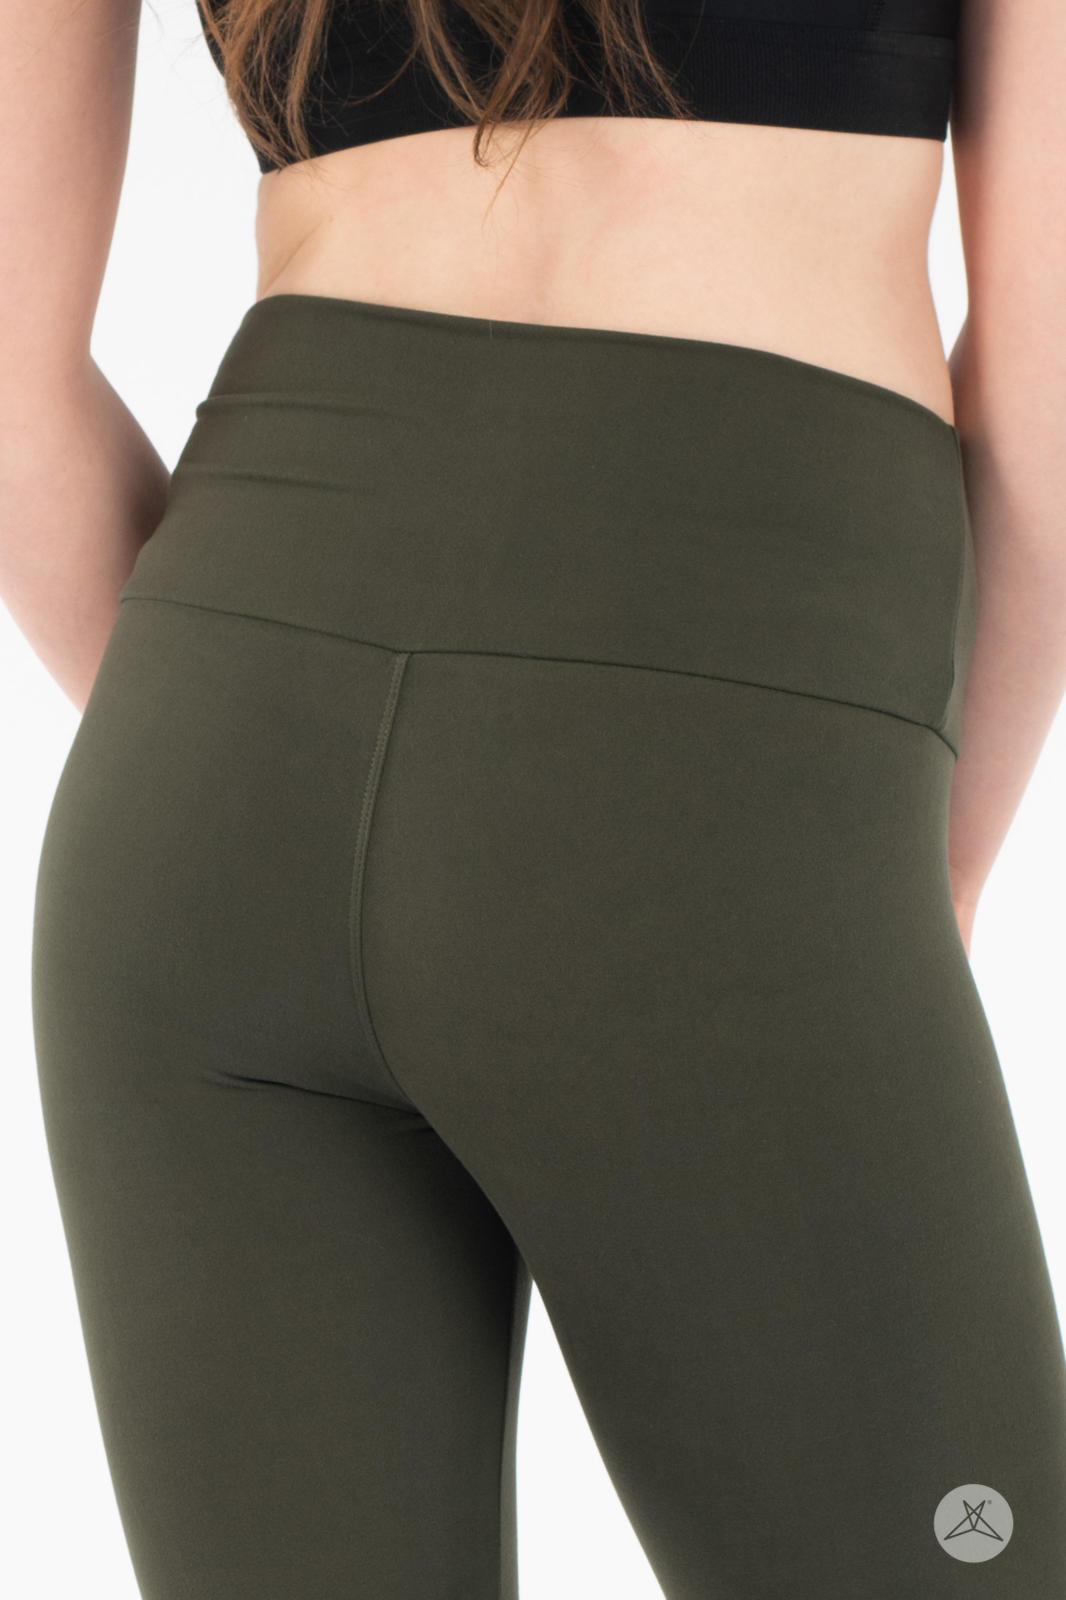 Made in the Suede Olive Green Suede Leggings  Black long sleeve crop top,  Leggings are not pants, Olive green pants